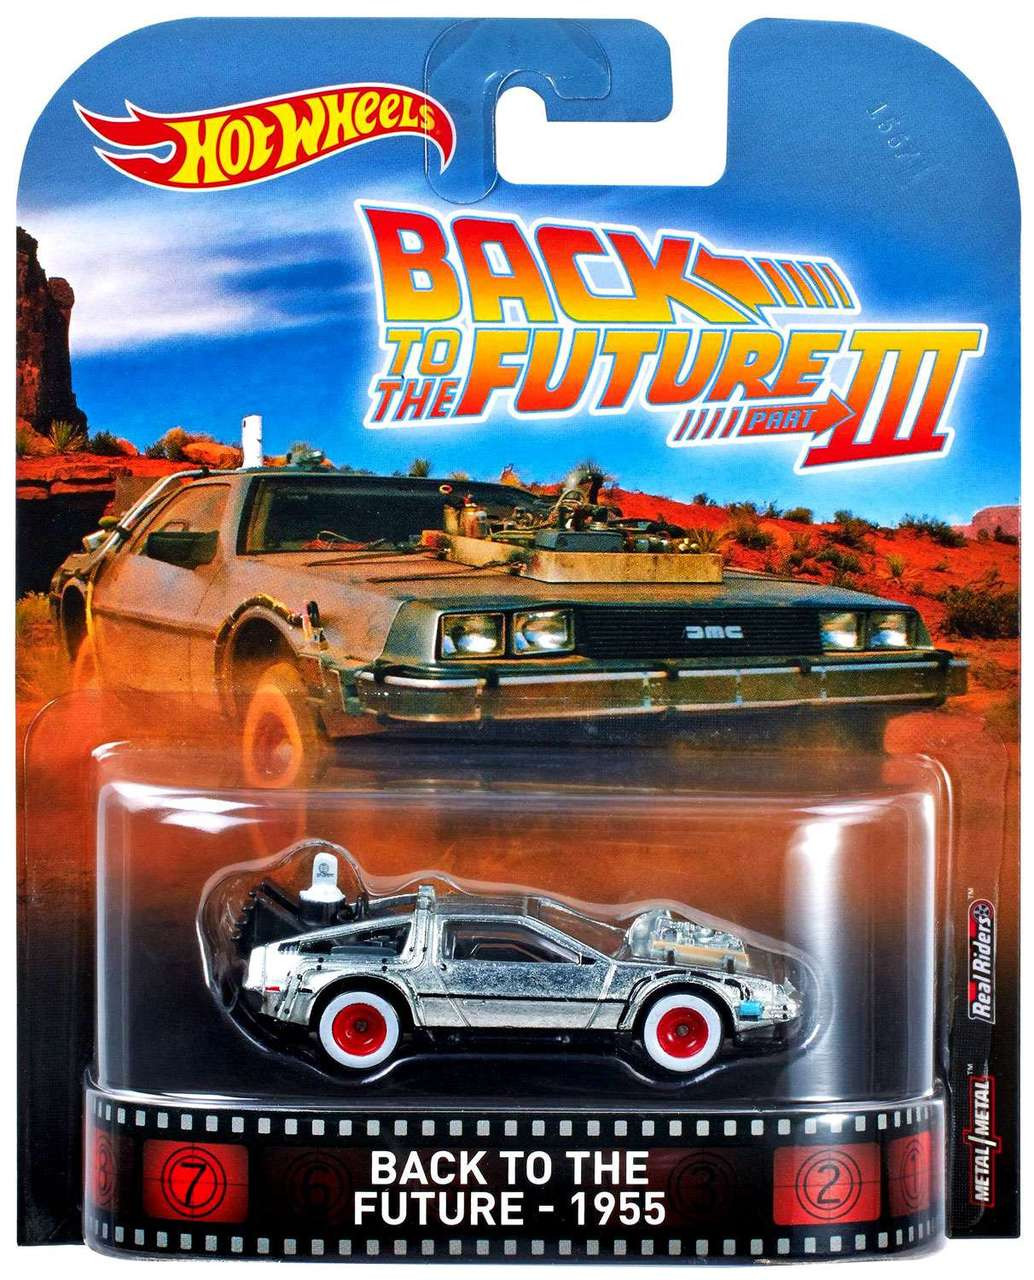 Hot Wheels Back To The Future Part Iii Hw Retro Entertainment Delorean Time Machine 1955 164 Diecast Car Mattel Toys Toywiz - they added a delorean time machine to roblox vehicle